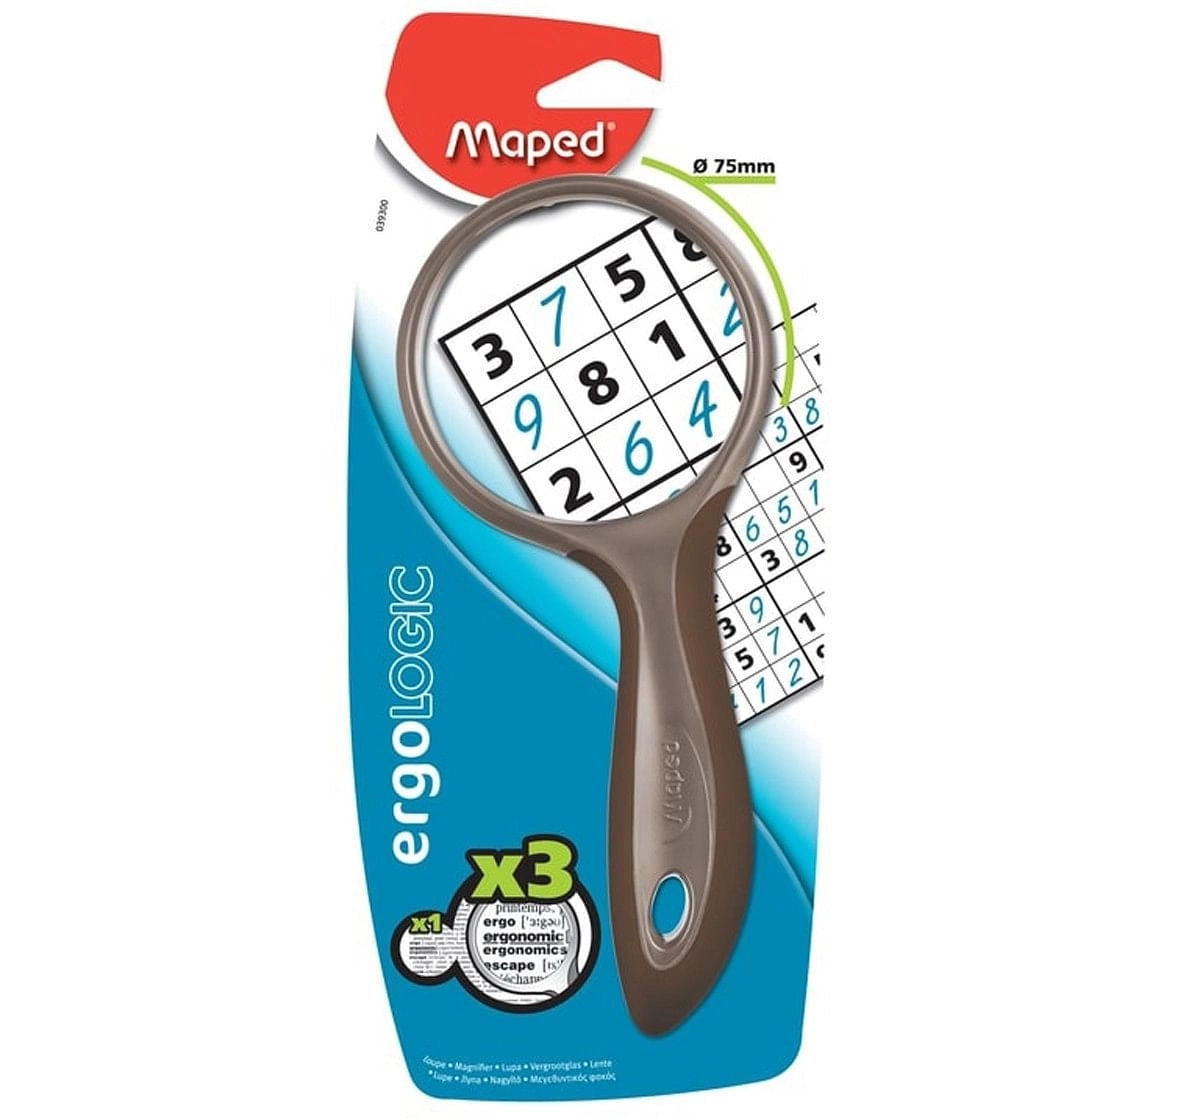 Maped Magnifier 75mm X3 Zoom Black 7Y+